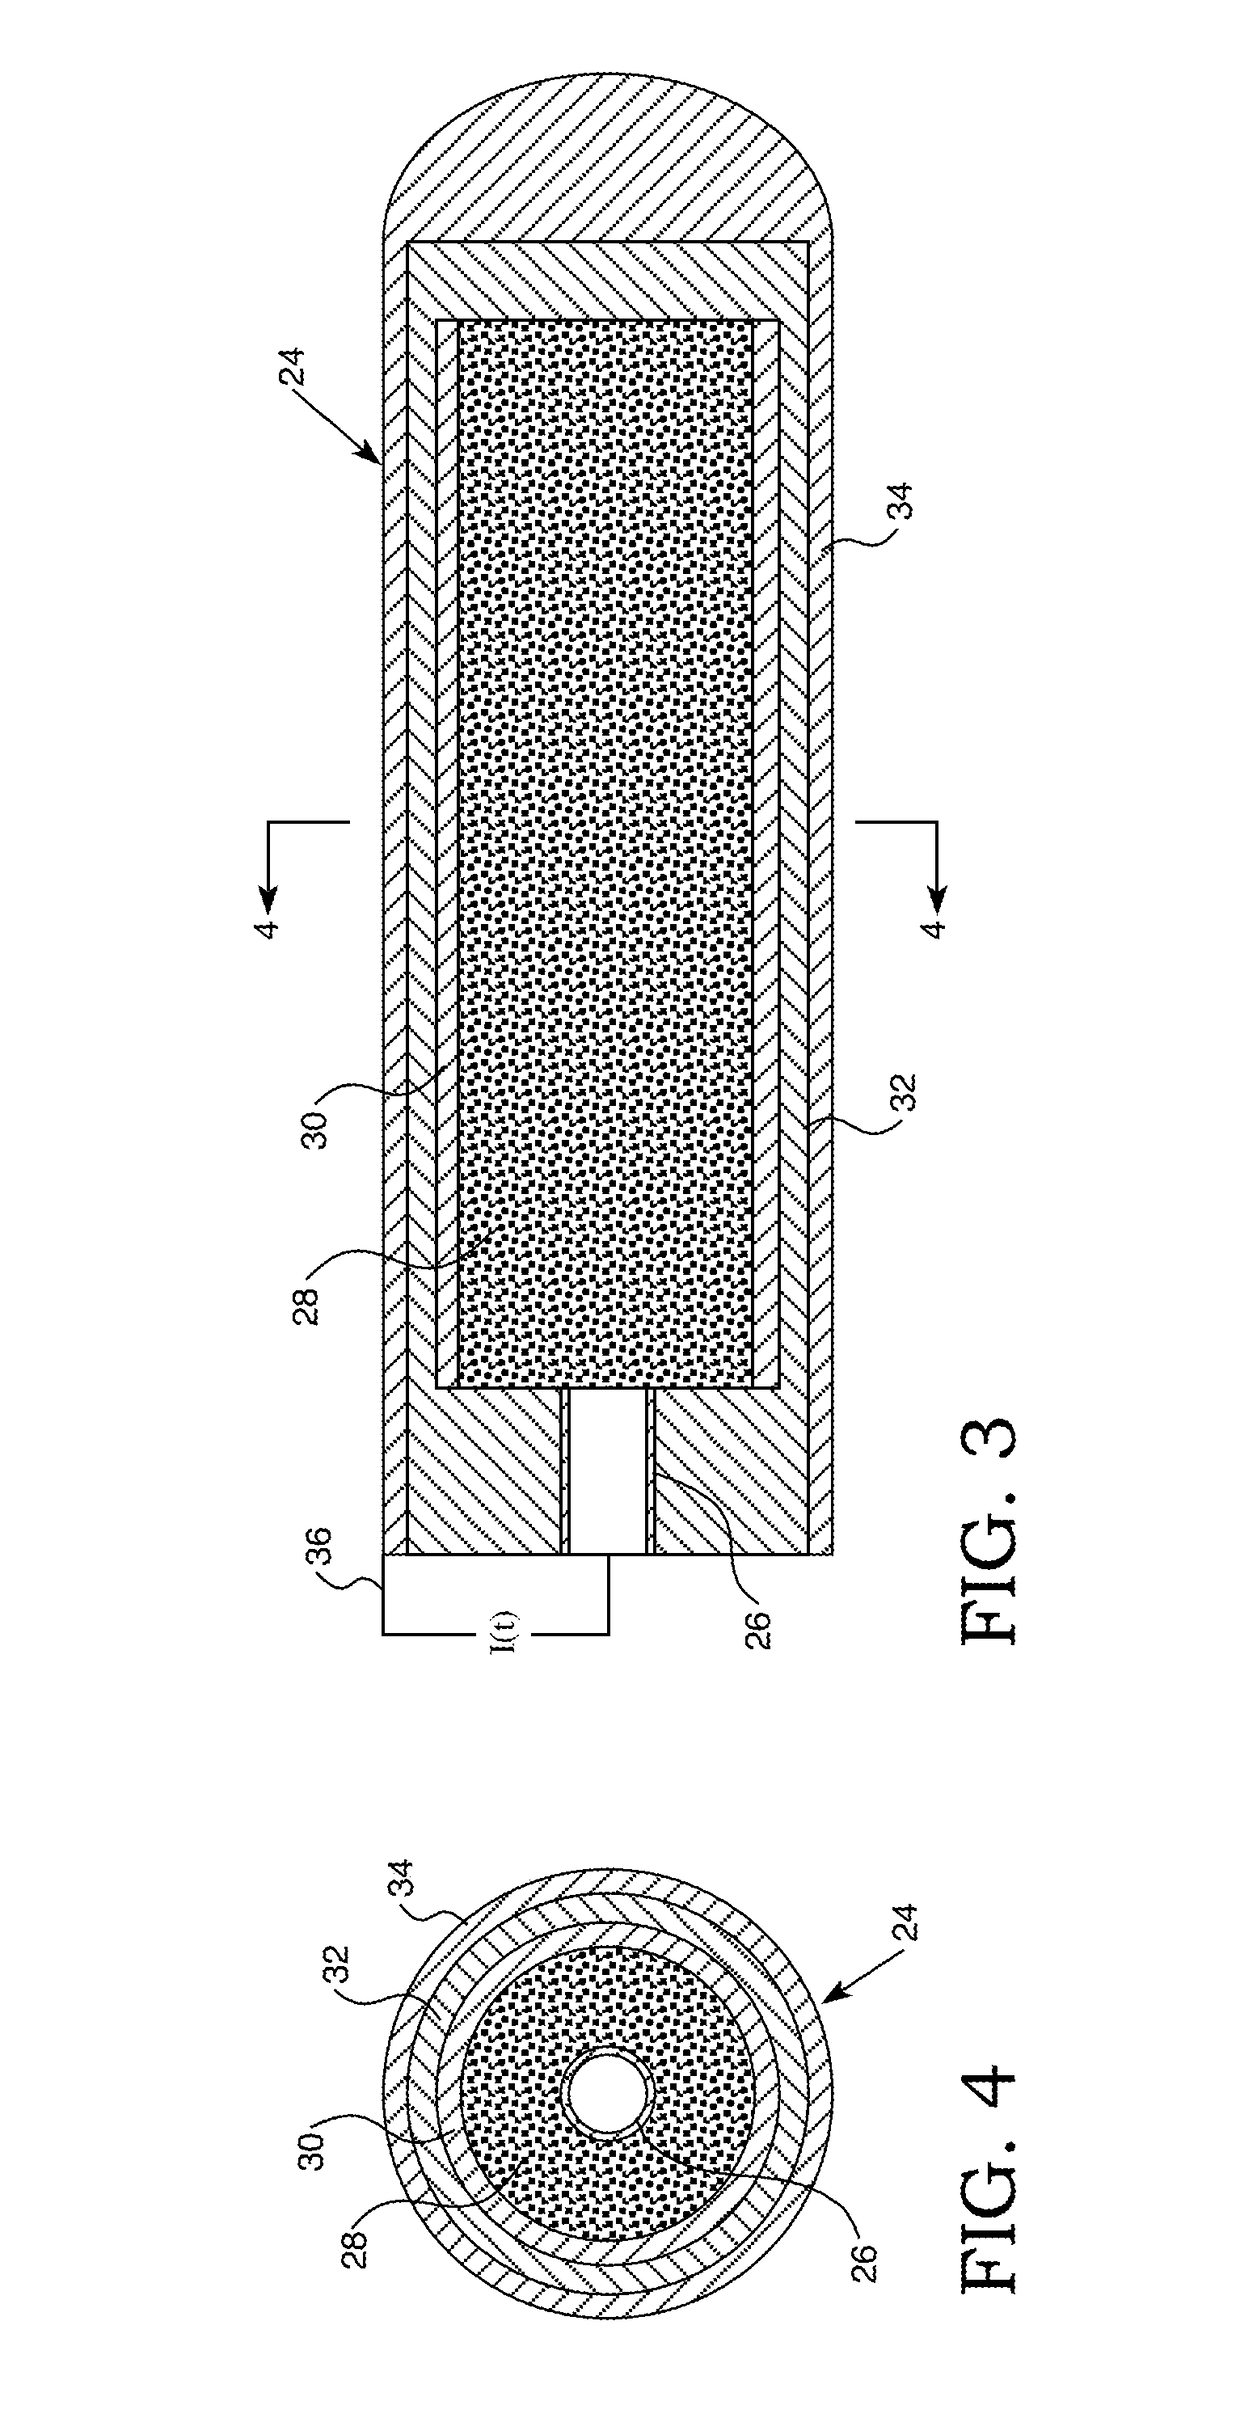 Nuclear powered vacuum microelectronic device